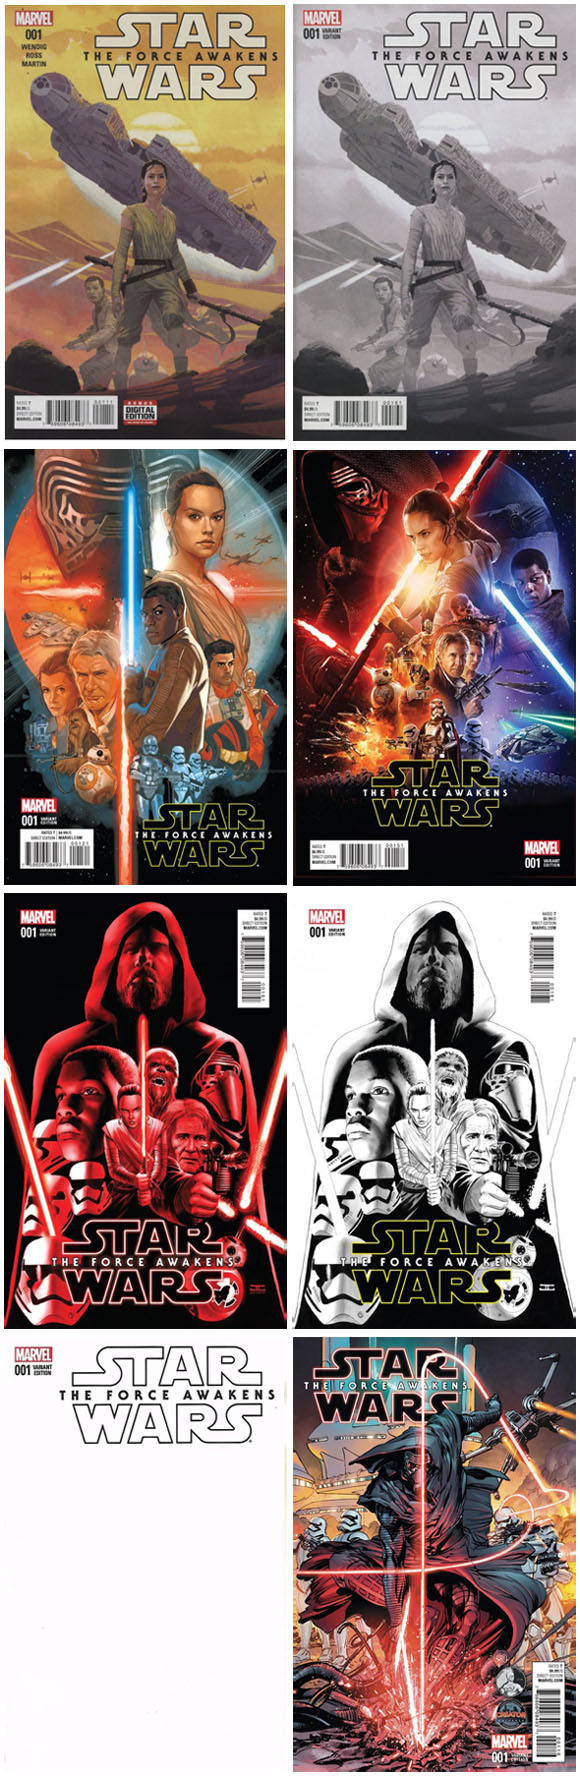 Star Wars: Force Awakens Adaptation #1 The other covers